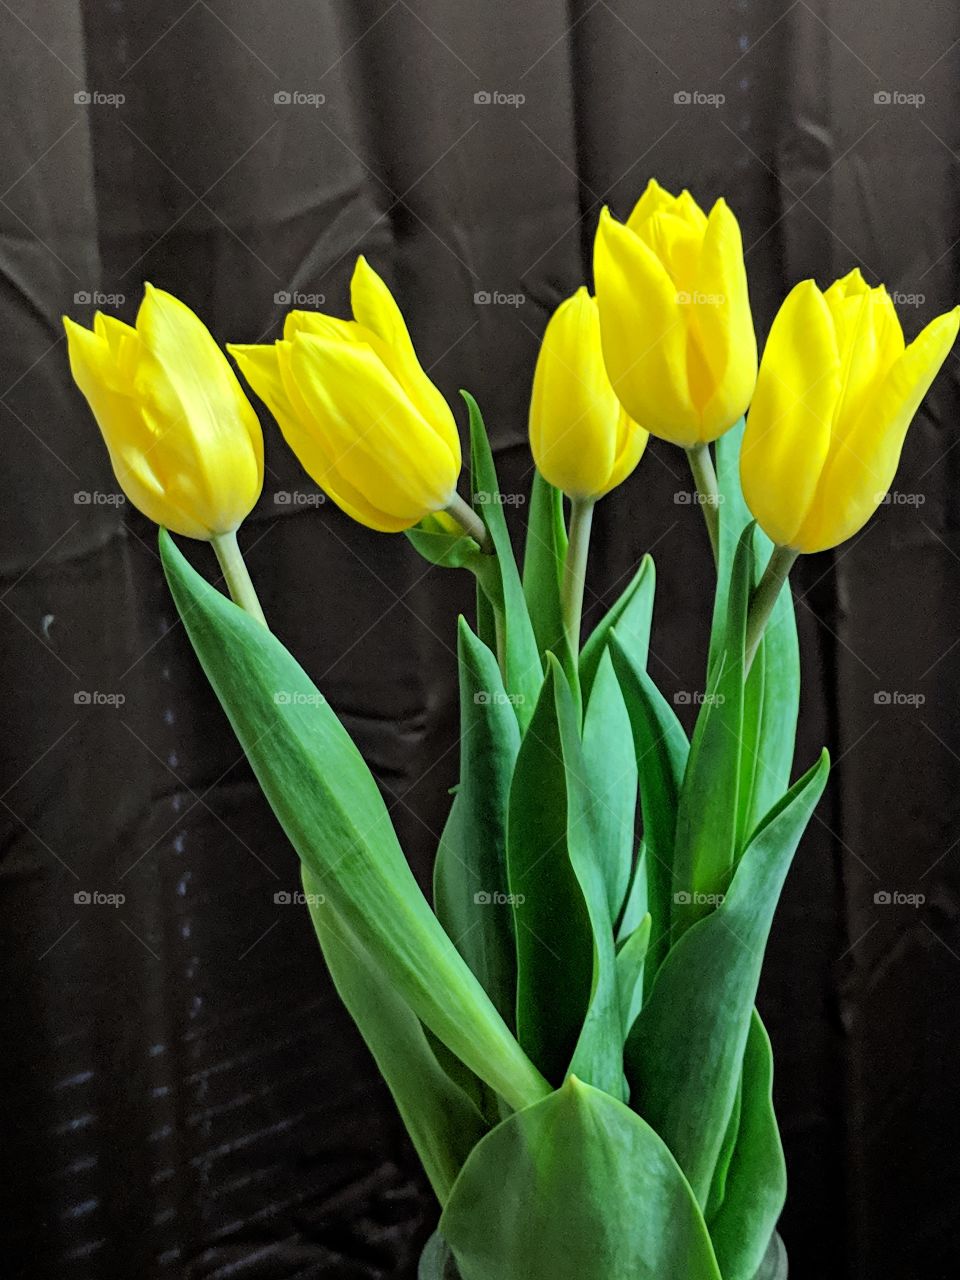 five yellow tulips in bloom